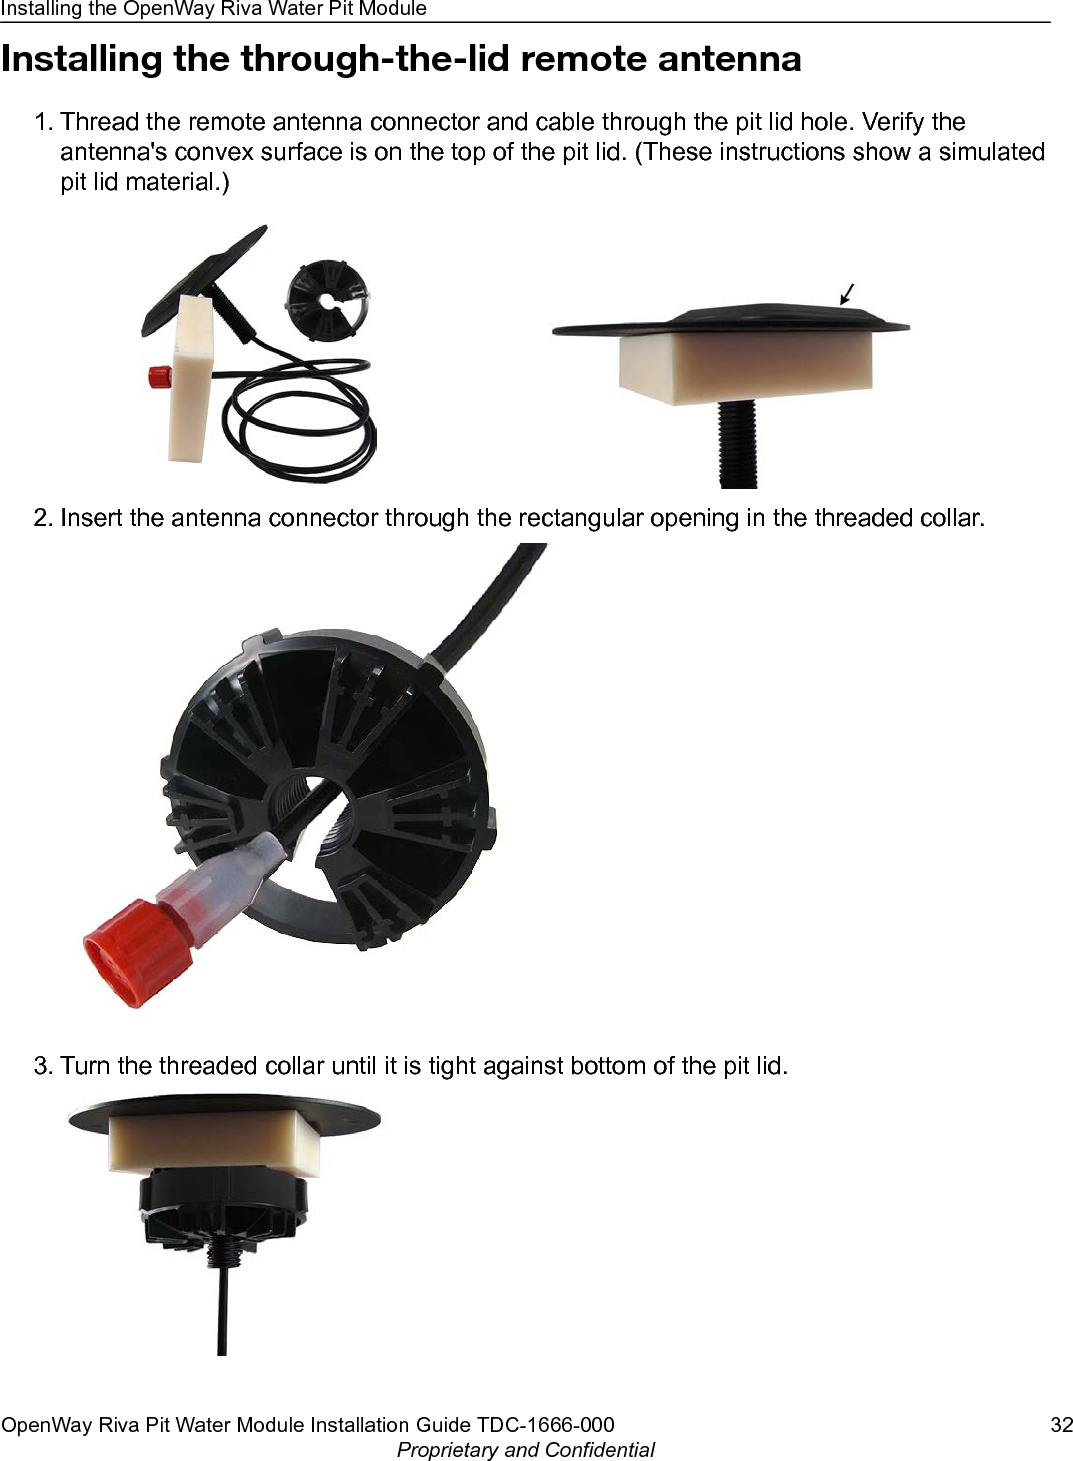 Installing the through-the-lid remote antenna1. Thread the remote antenna connector and cable through the pit lid hole. Verify theantenna&apos;s convex surface is on the top of the pit lid. (These instructions show a simulatedpit lid material.)2. Insert the antenna connector through the rectangular opening in the threaded collar.3. Turn the threaded collar until it is tight against bottom of the pit lid.Installing the OpenWay Riva Water Pit ModuleOpenWay Riva Pit Water Module Installation Guide TDC-1666-000 32Proprietary and Confidential